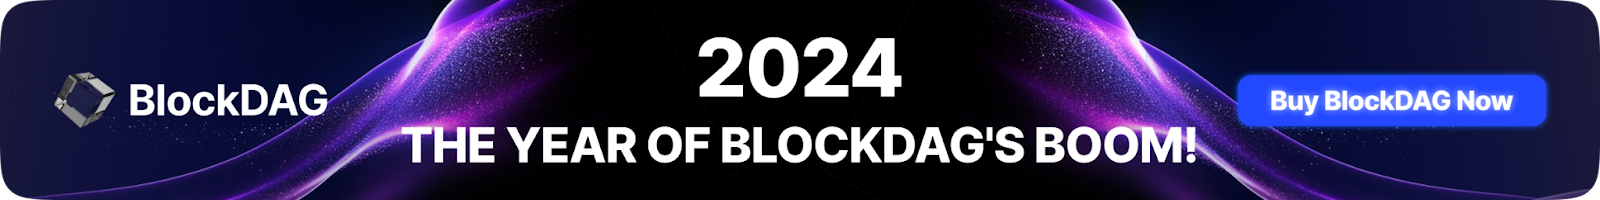 BlockDAG’s Team, & CEO Announcement Sparks 40% Price Increase: End of the Road for NEAR & Ethereum?